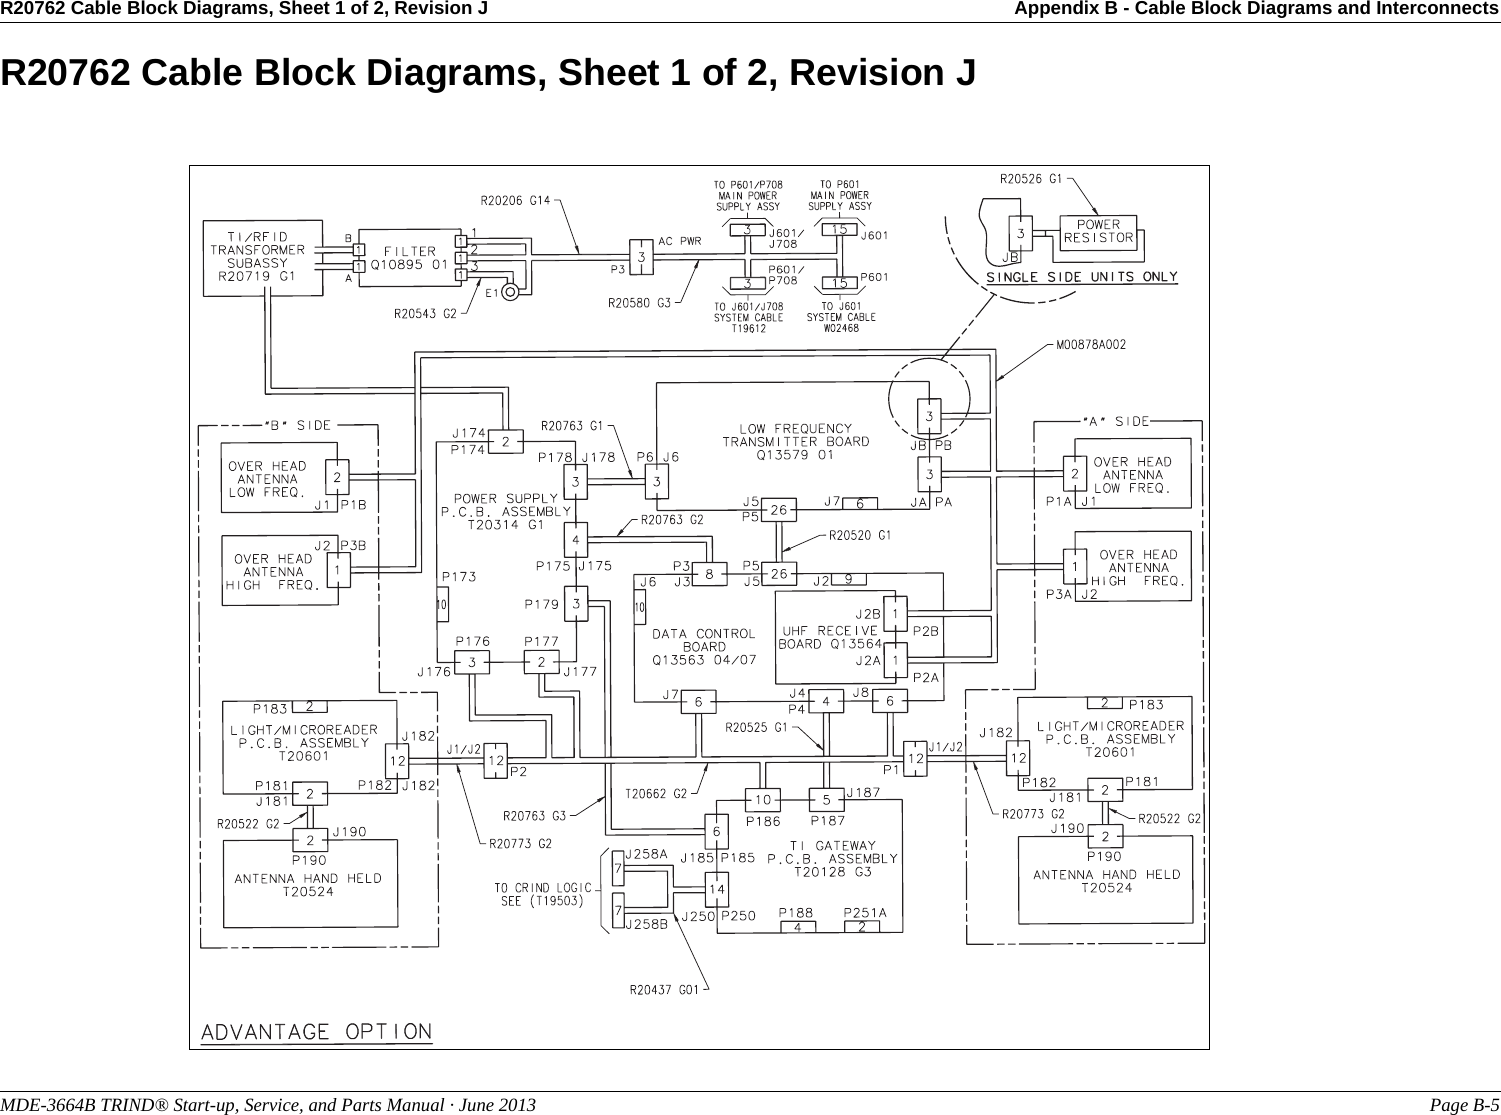 R20762 Cable Block Diagrams, Sheet 1 of 2, Revision J Appendix B - Cable Block Diagrams and InterconnectsMDE-3664B TRIND® Start-up, Service, and Parts Manual · June 2013 Page B-5R20762 Cable Block Diagrams, Sheet 1 of 2, Revision J